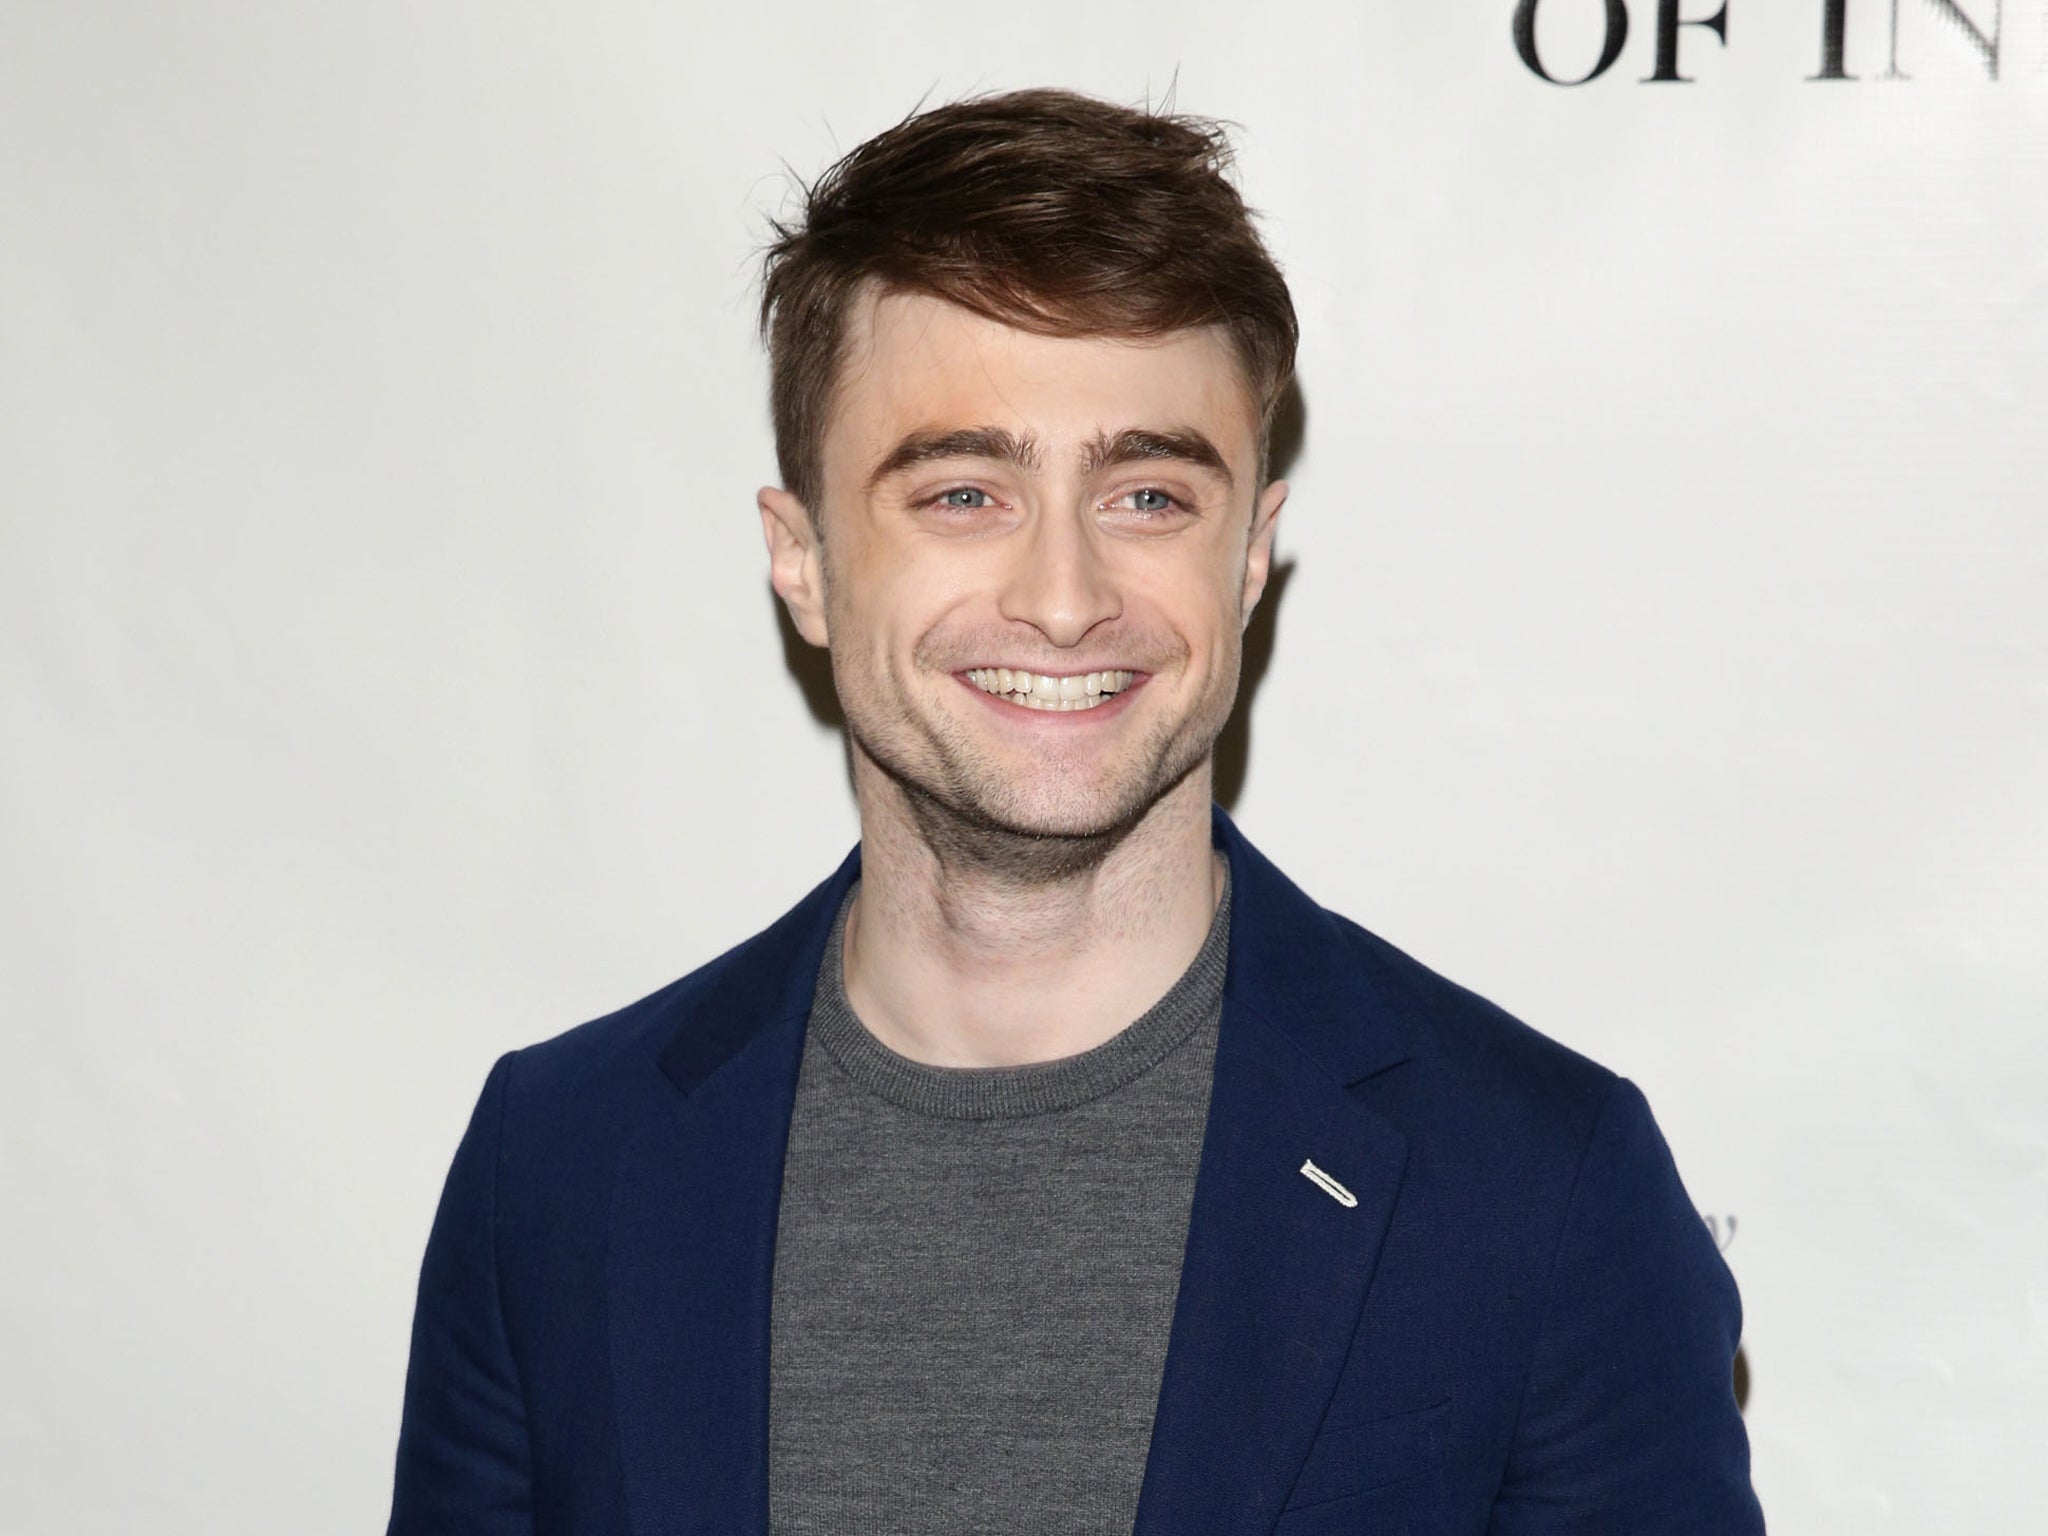 "I thought it’d be funny, me and Daniel Radcliffe as father and son."